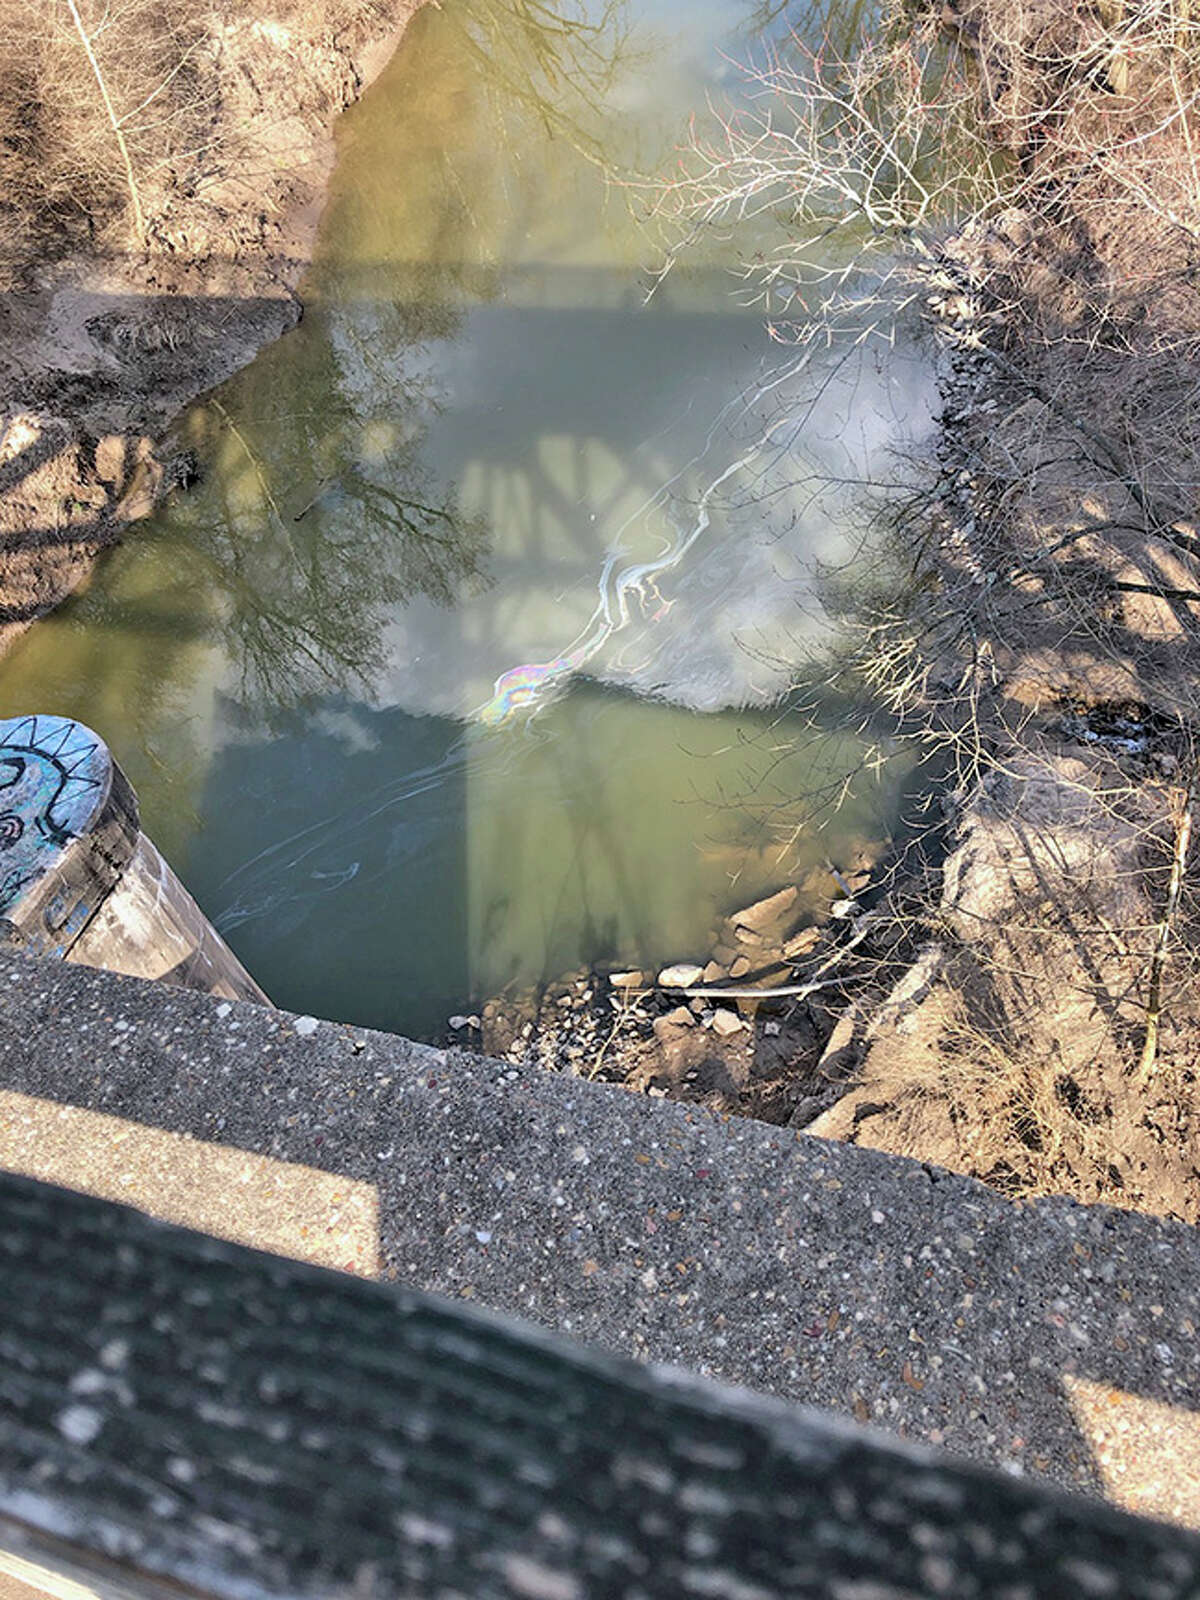 This photo, taken Tuesday by Edwardsville resident and Sierra Club member Toni Oplt, was taken from a bridge crossing the Cahokia Diversion Channel and shows crude oil in the water from last Friday’s oil spill, which occurred near the intersection of Illinois 143 and Illinois 159.